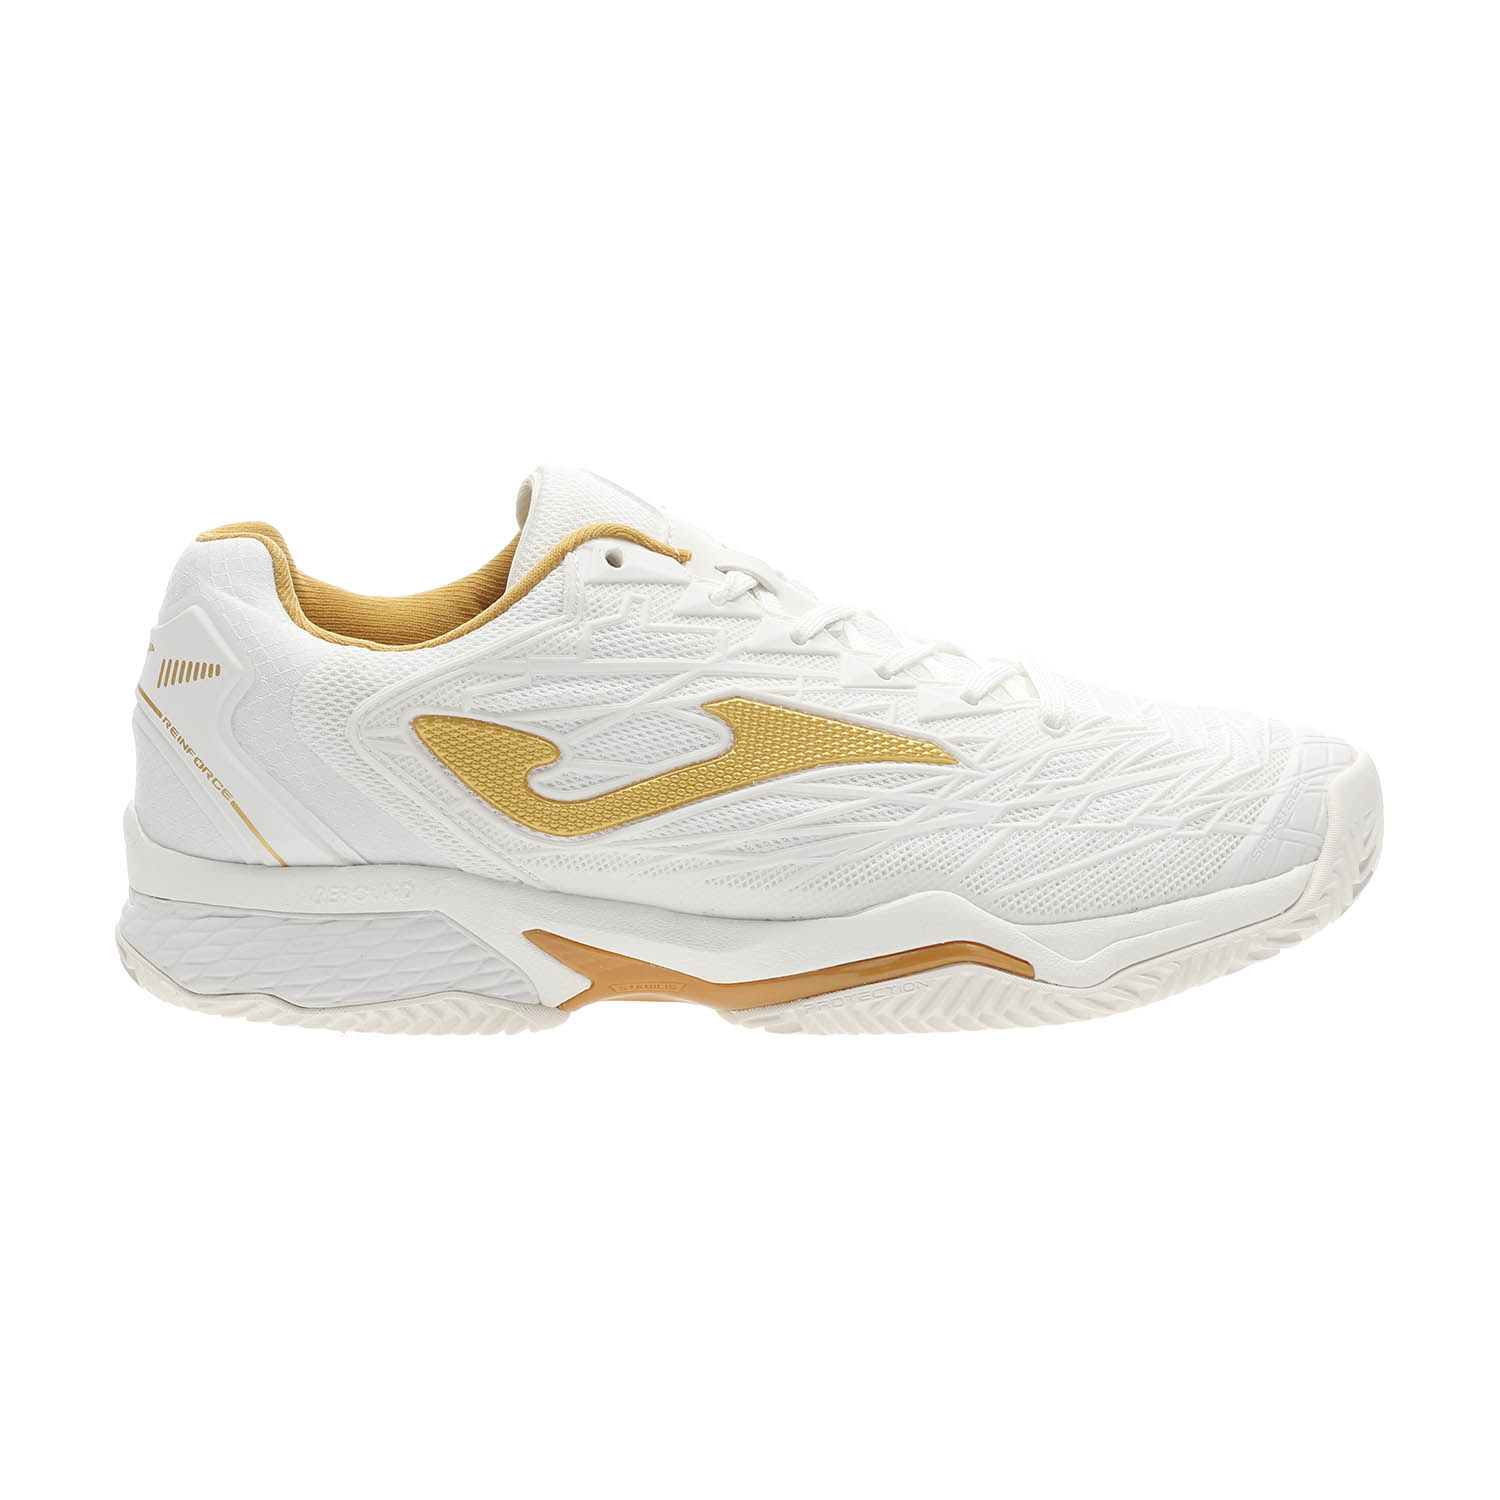 tennis shoes gold